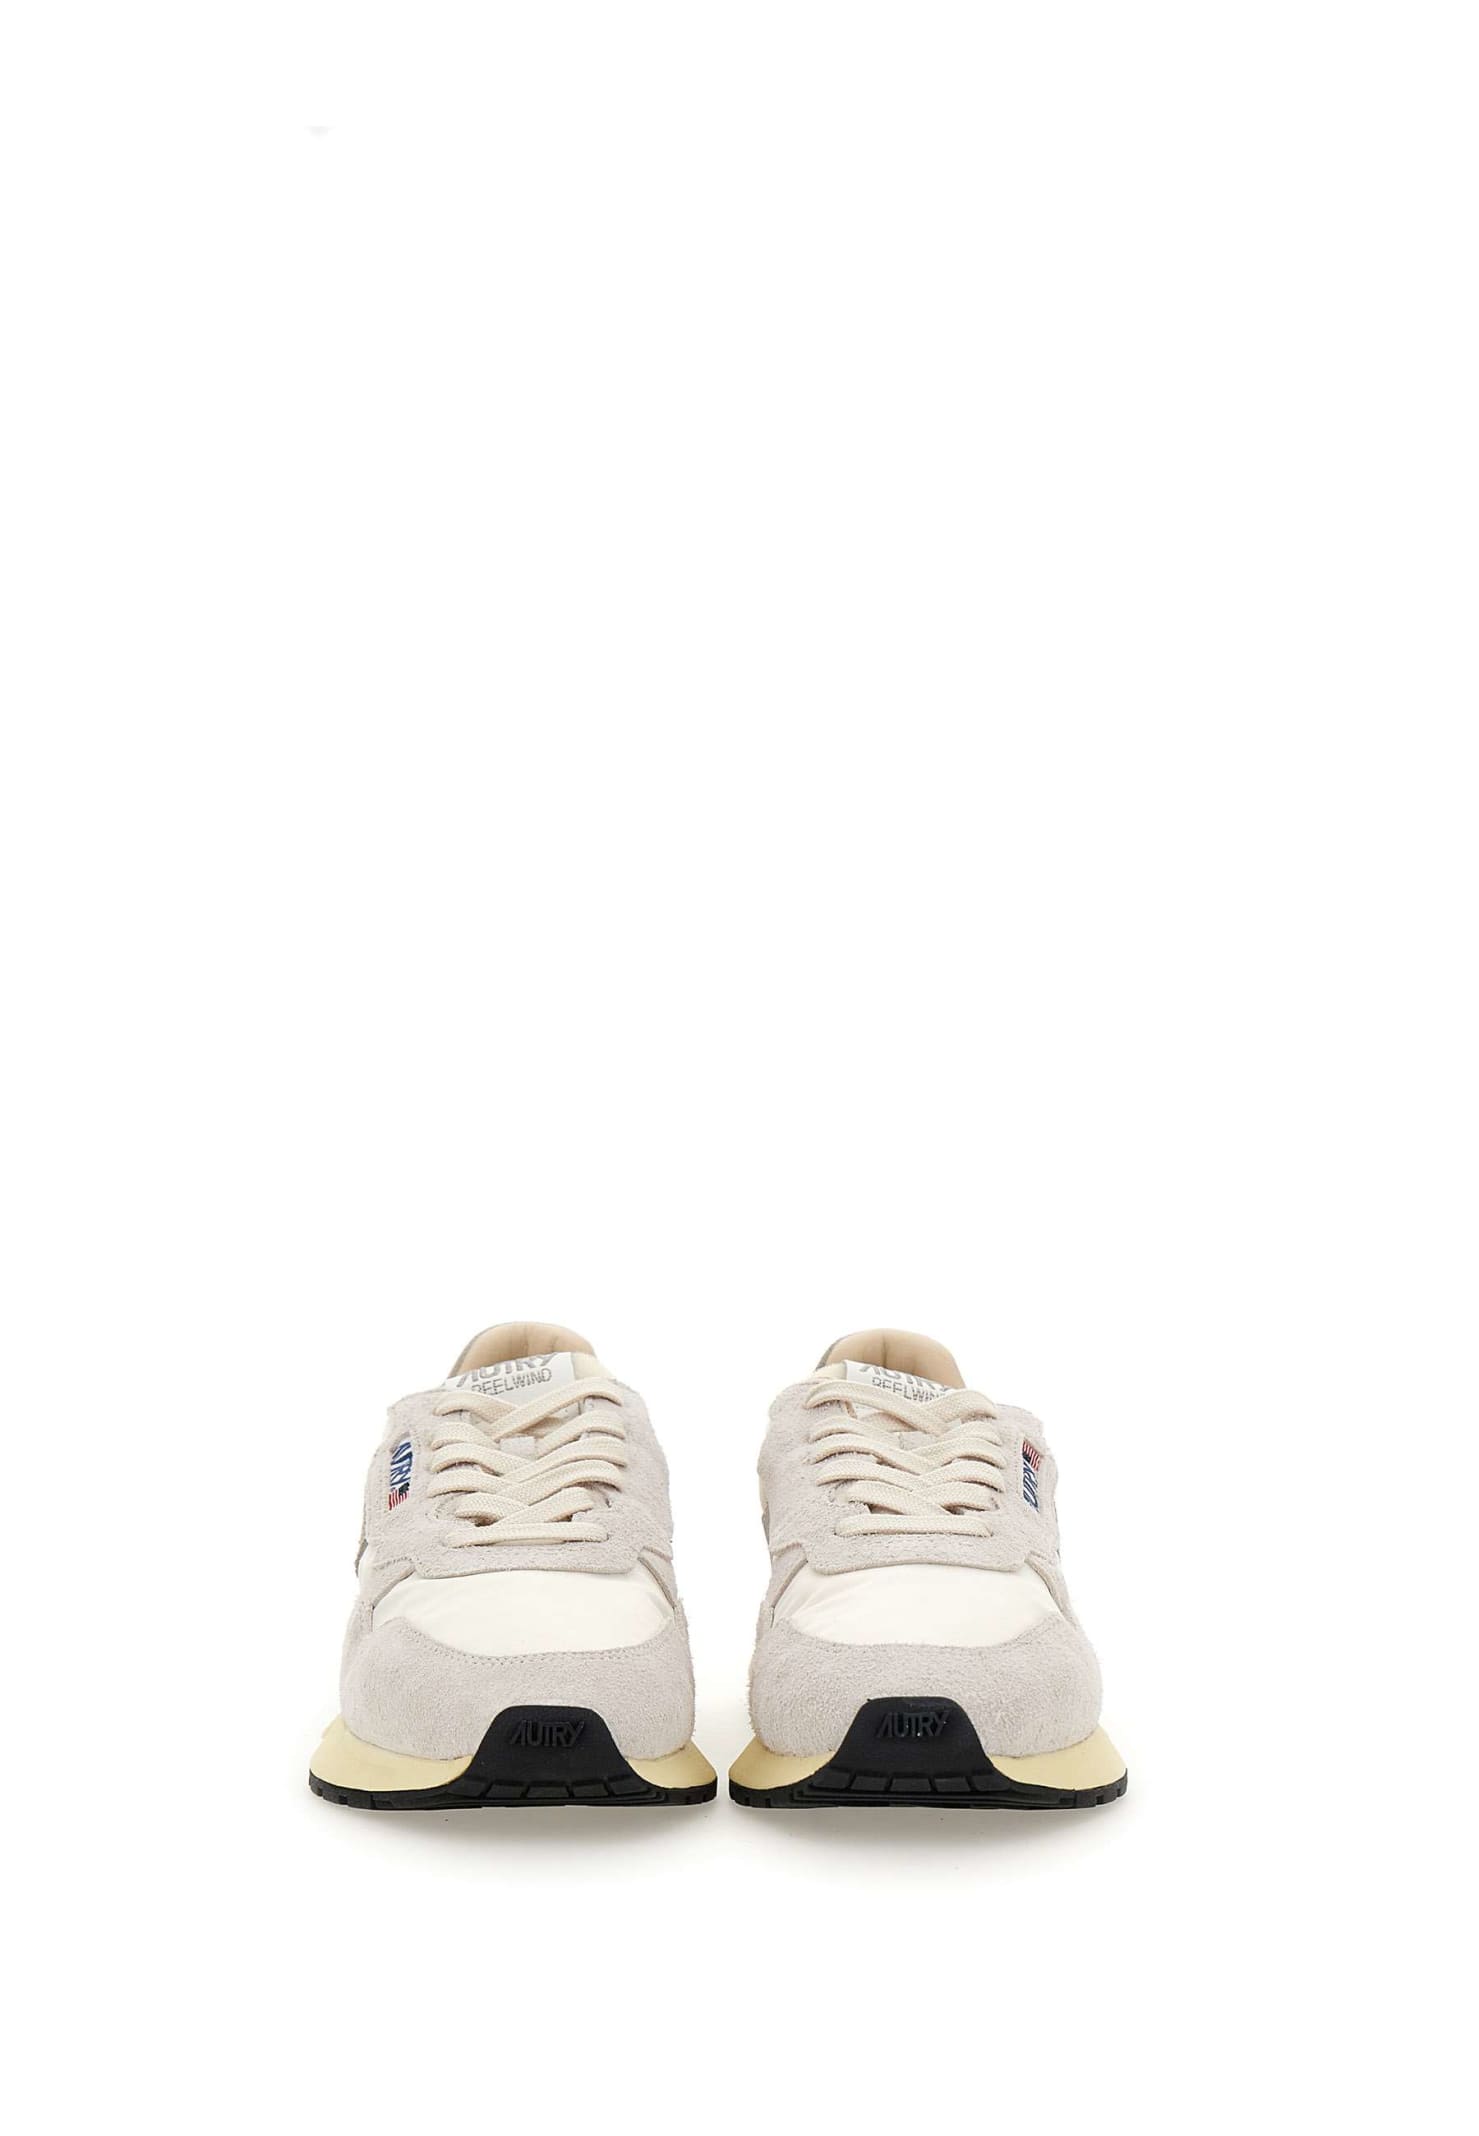 Shop Autry Wwlm Nc04 Sneakers In White/grey